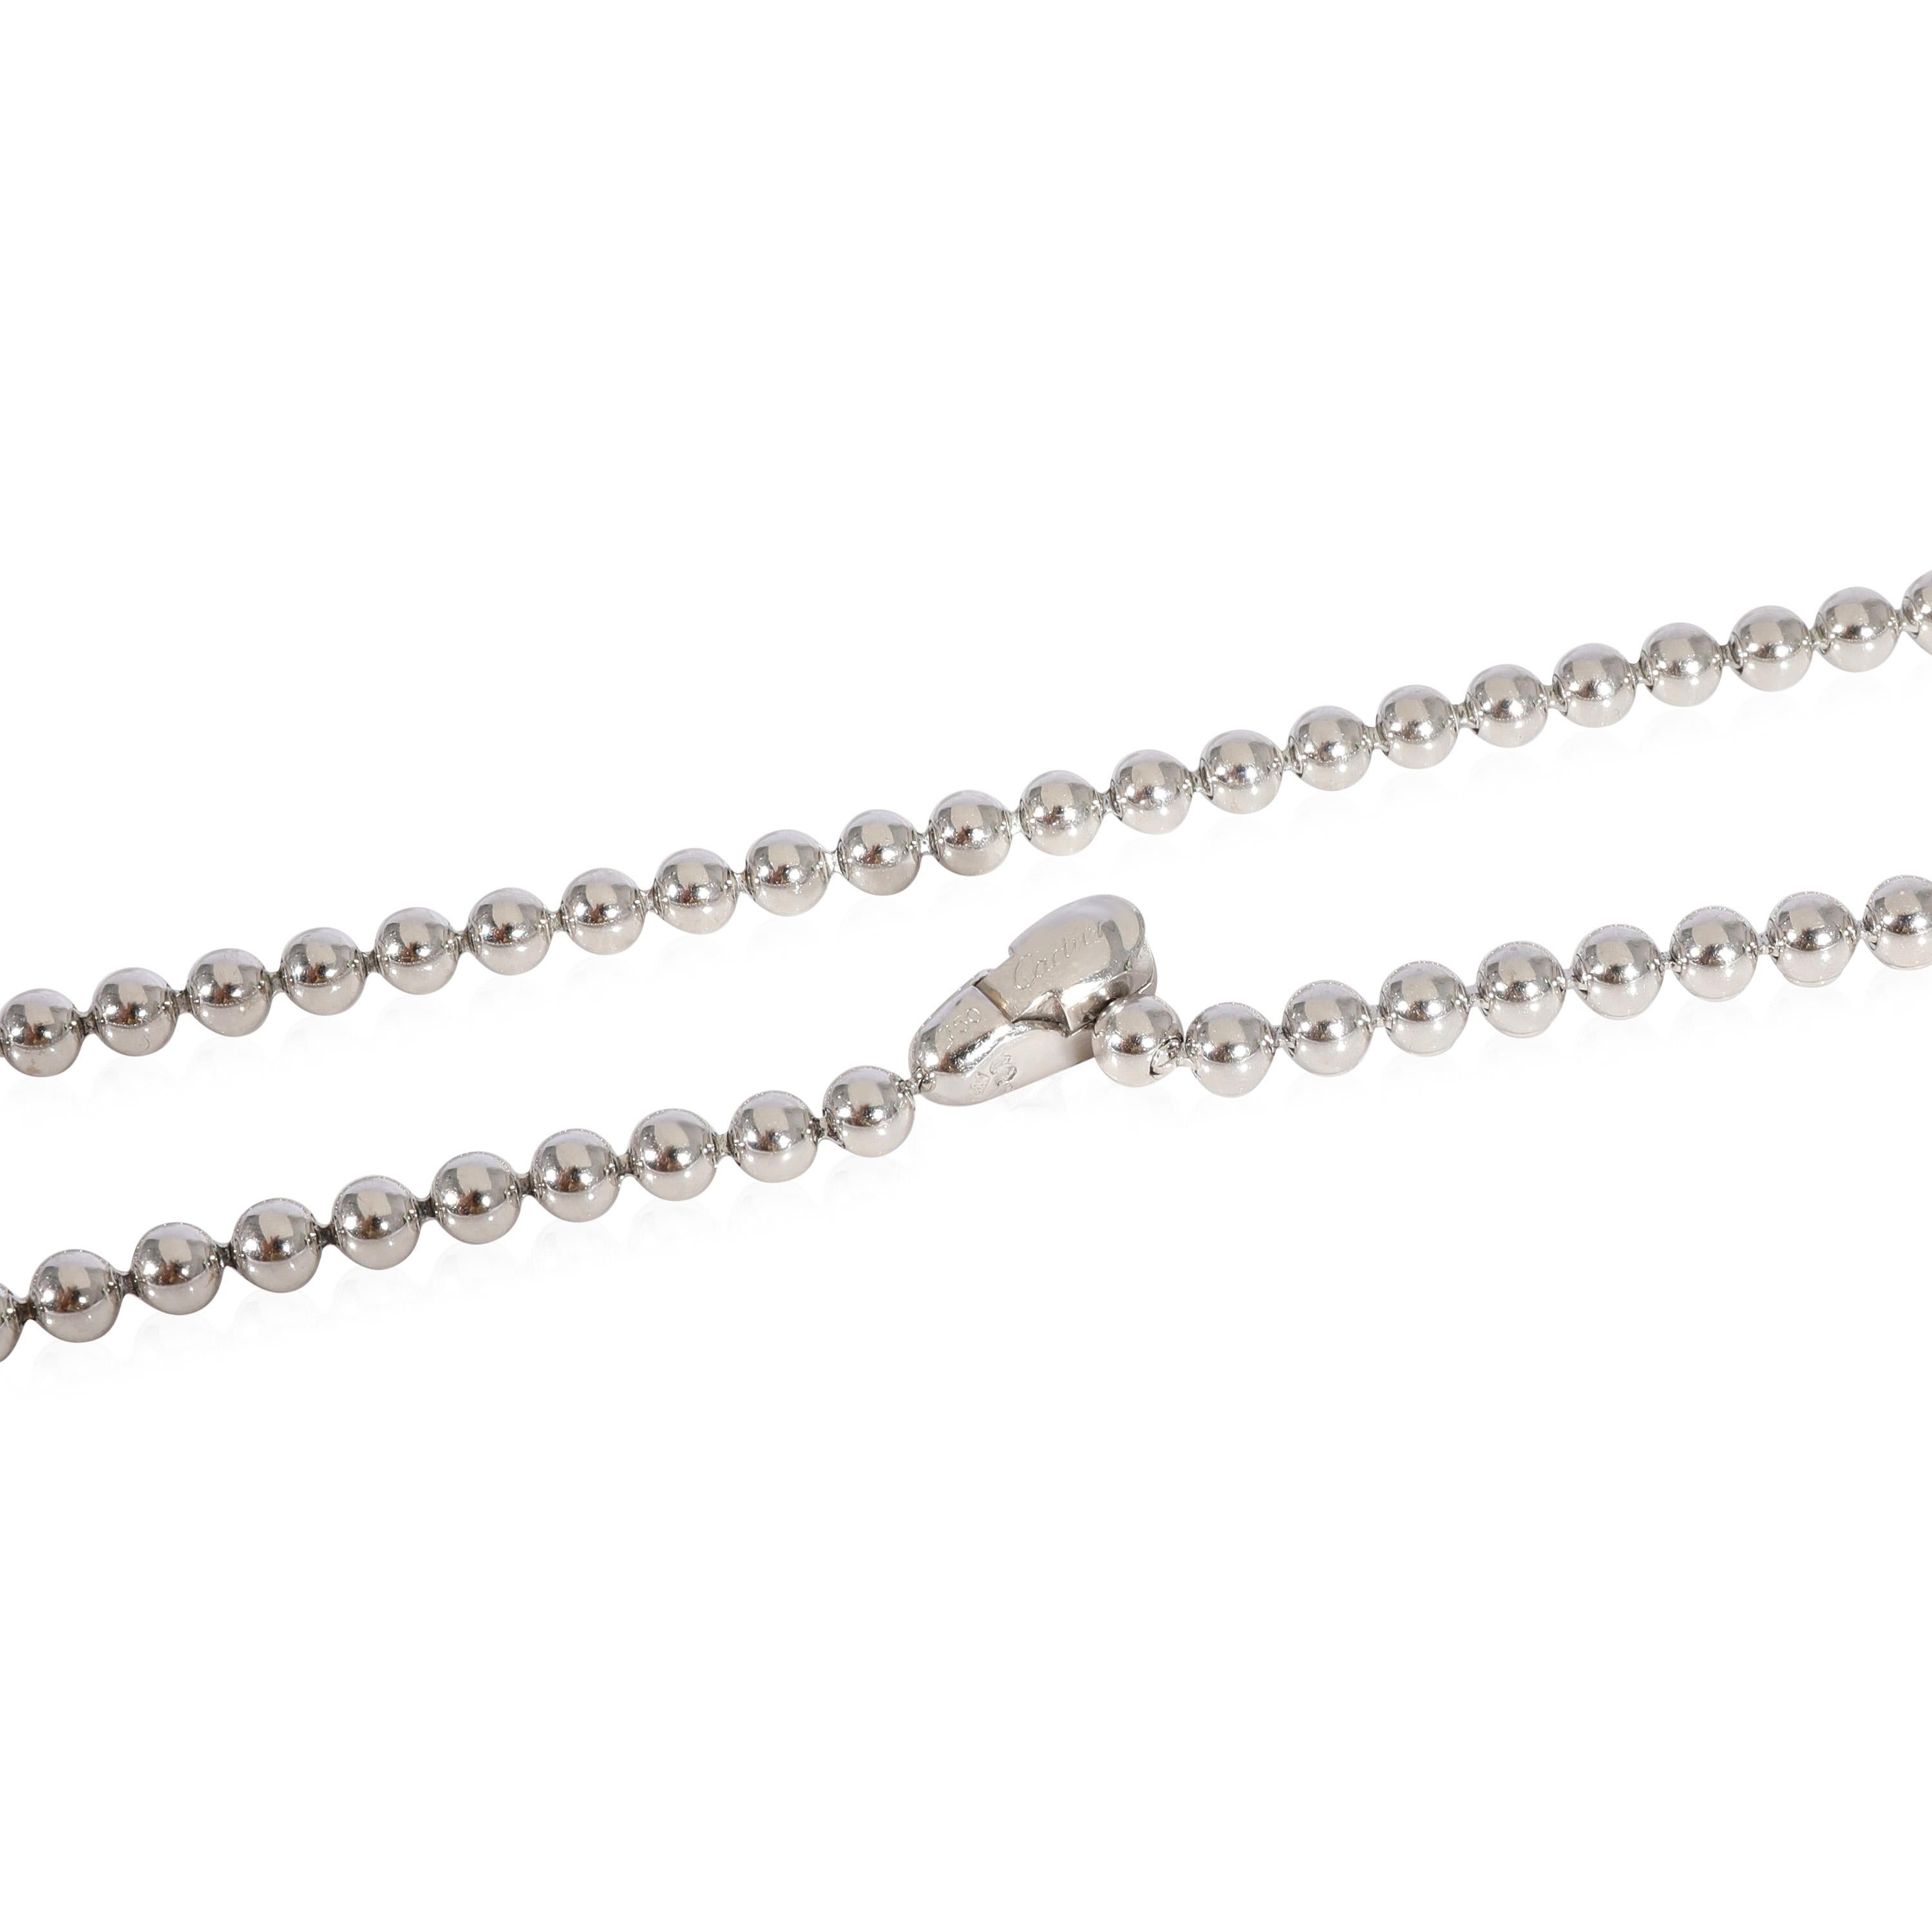 Cartier Perles de Diamants in 18k White Gold 6.75 CTW

PRIMARY DETAILS
SKU: 125030
Listing Title: Cartier Perles de Diamants in 18k White Gold 6.75 CTW
Condition Description: Retails for 57000 USD. In excellent condition. 22 inches in length. Comes